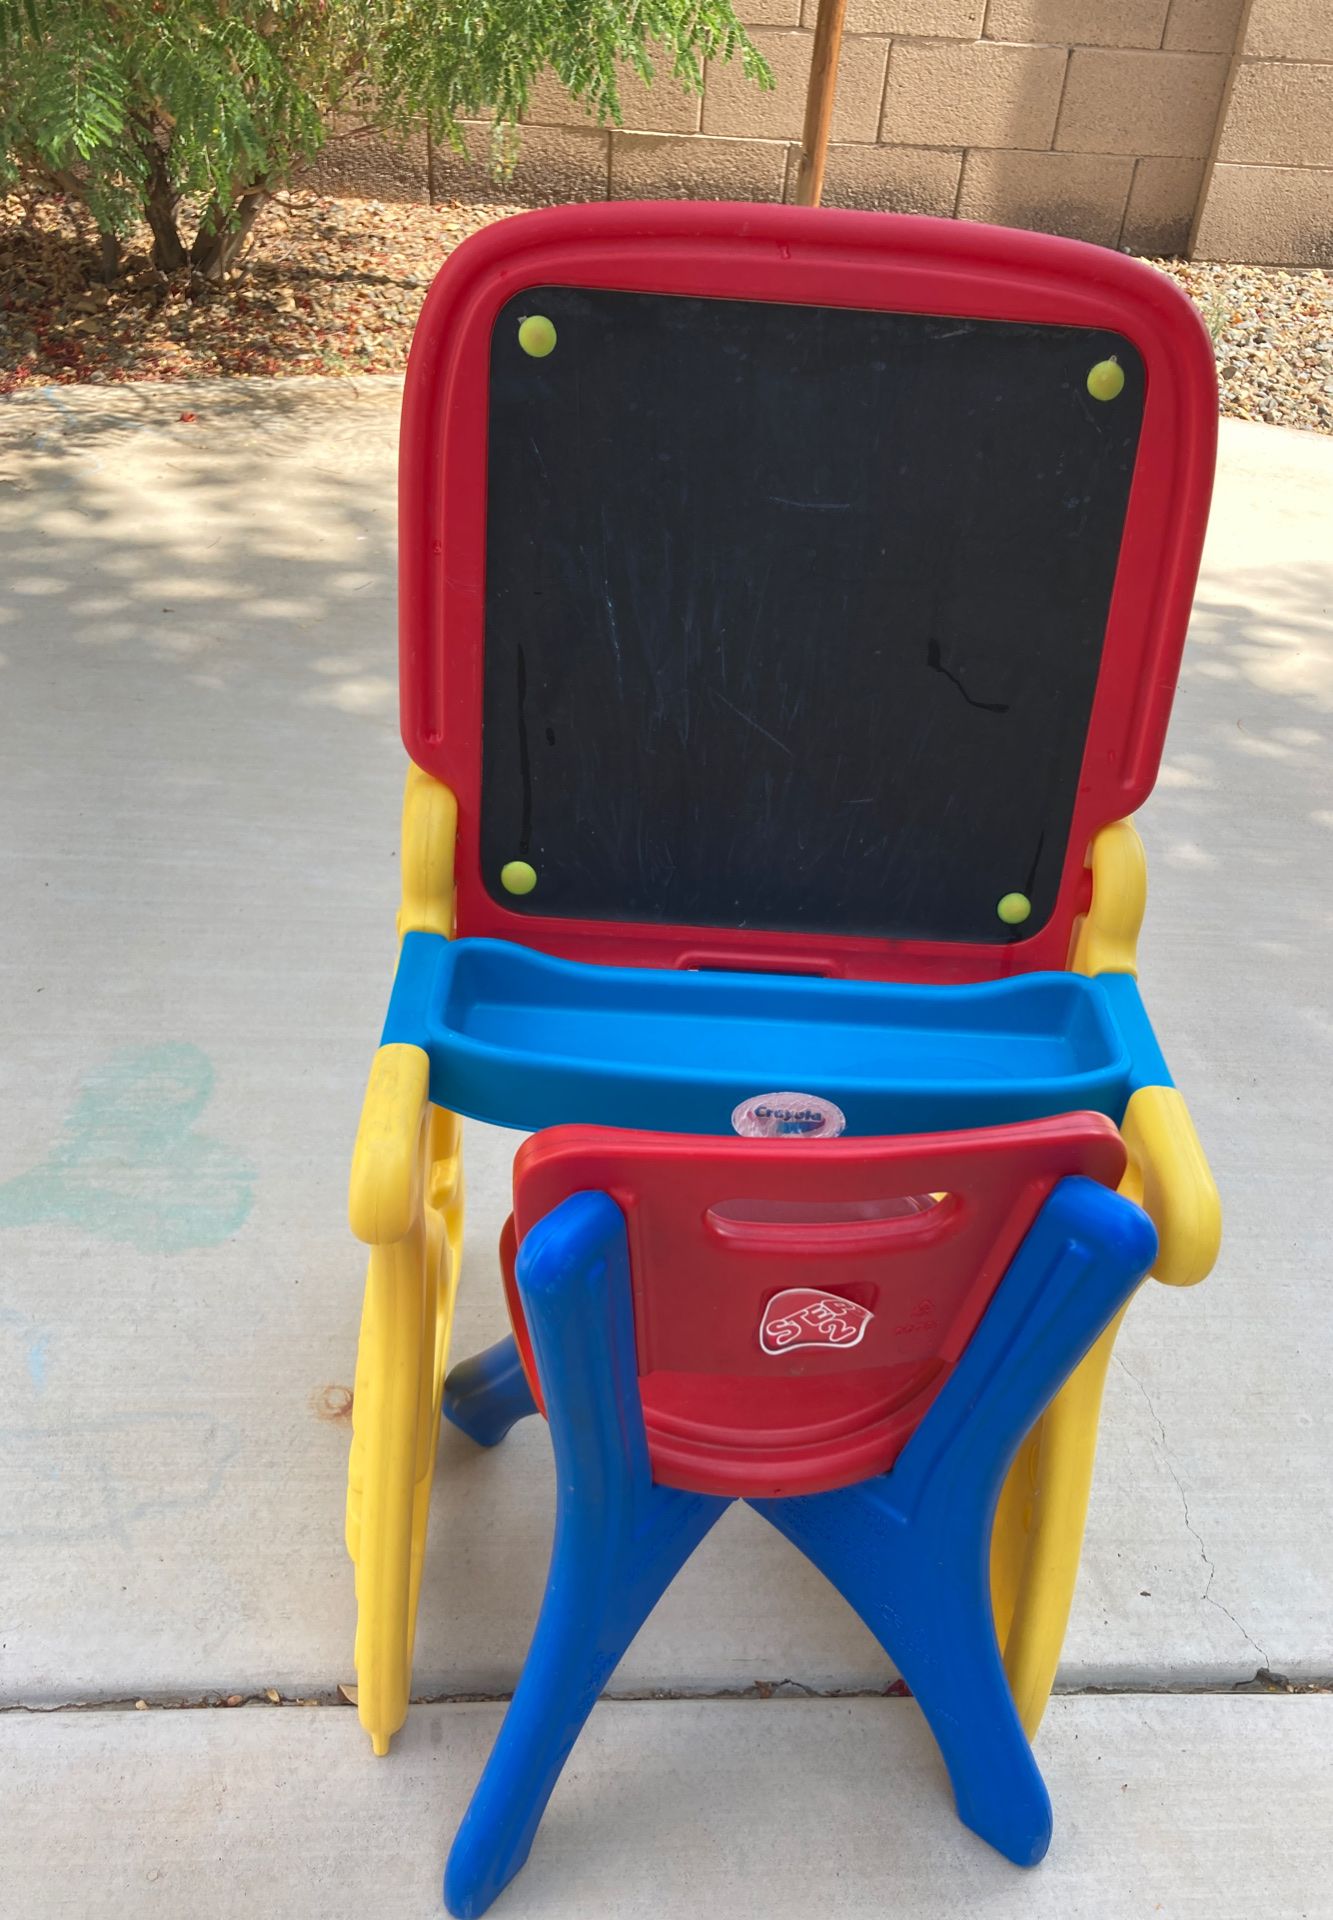 Little desk with chair for toddlers